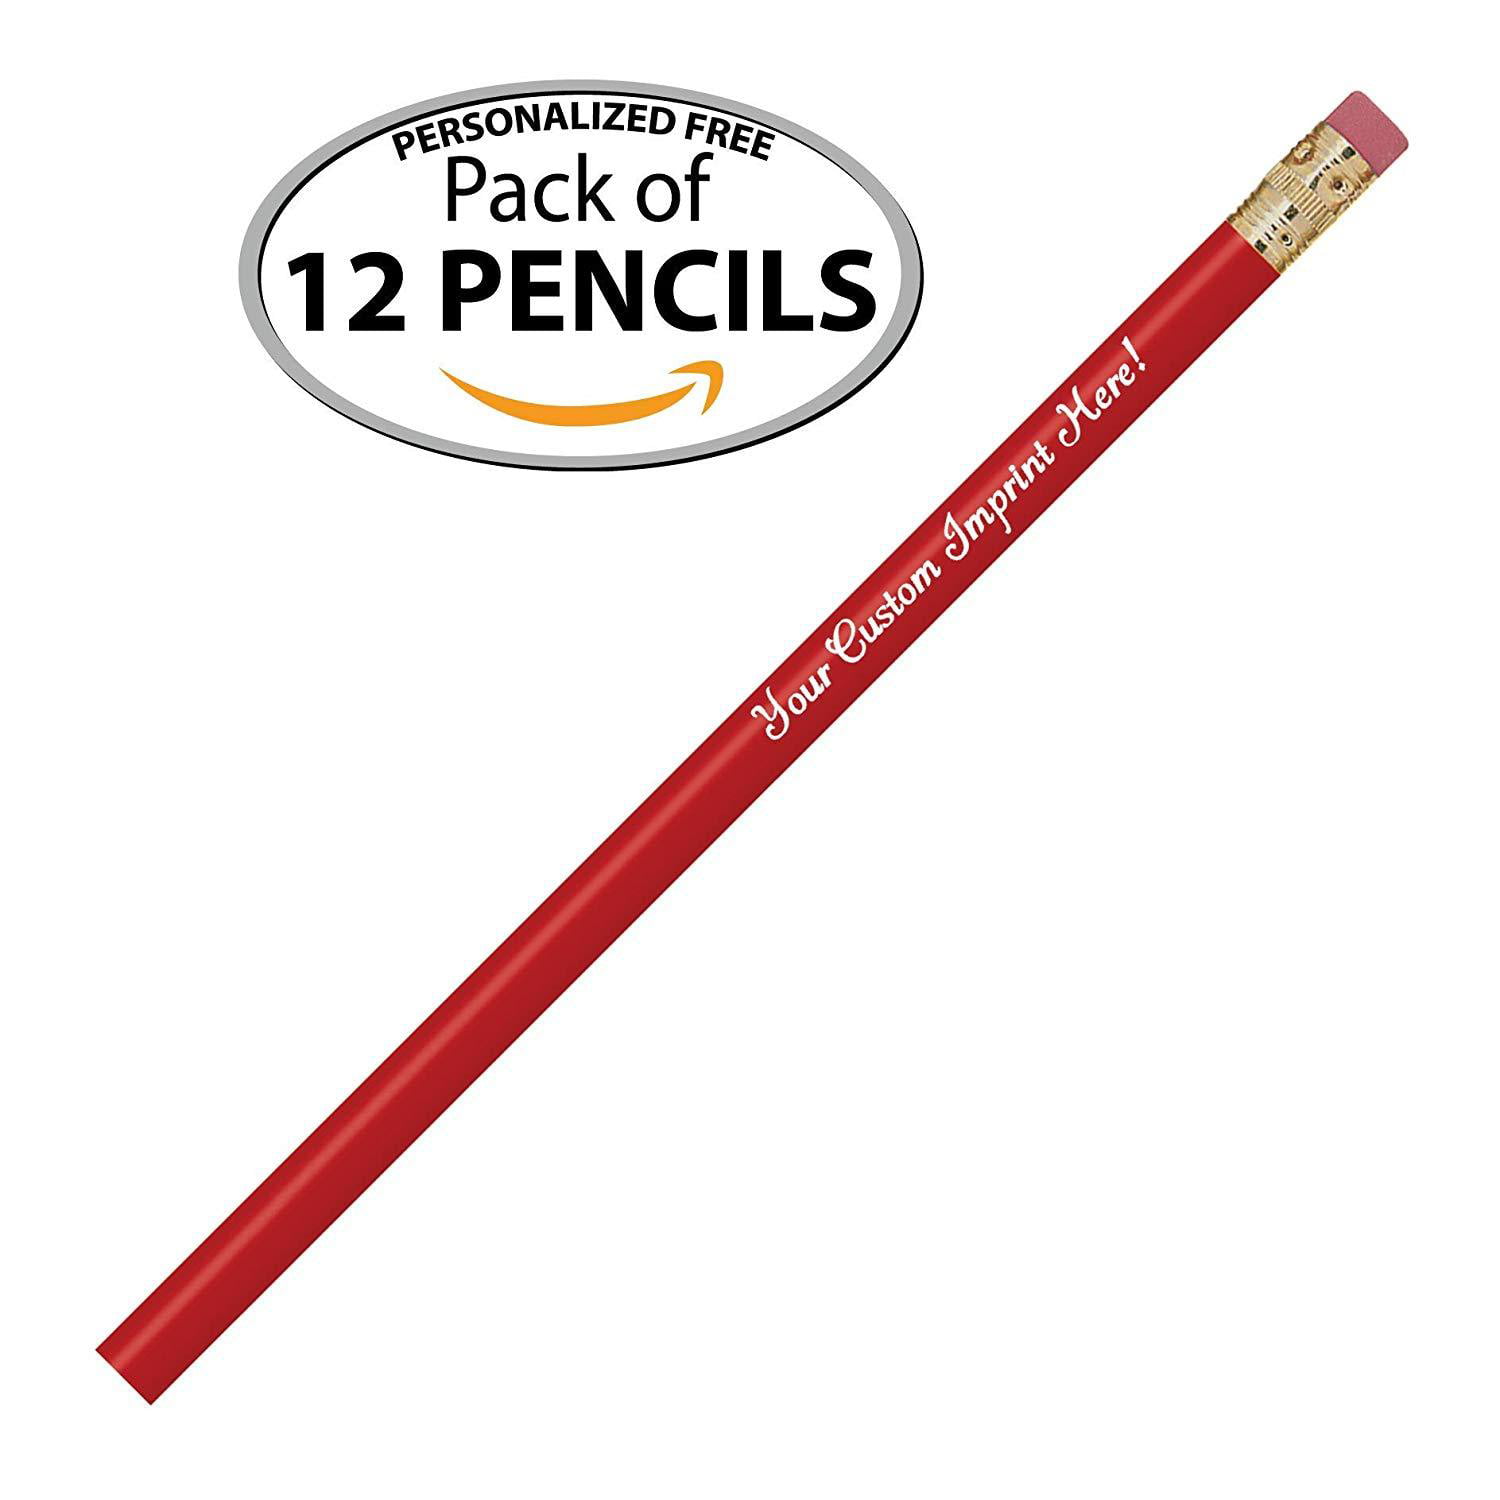 Assorted Colors Custom Printed with your message by Express Pencils Round text or logo 12 pkg FREE PERZONALIZATION Great gift idea Helping Hands Personalized Pencils